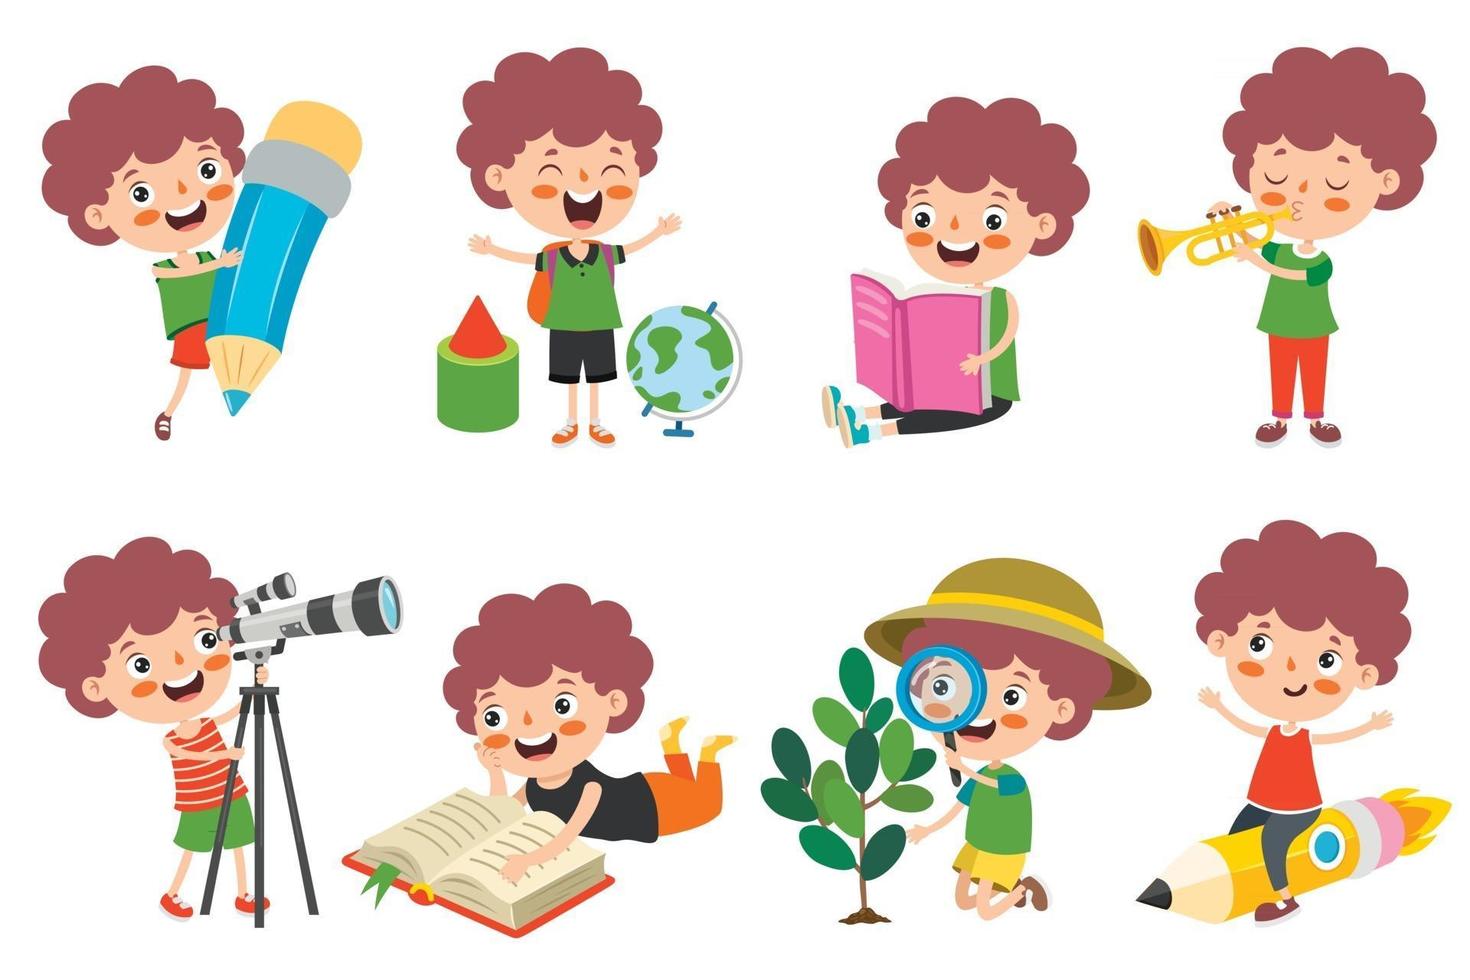 Cartoon Character Studying And Learning vector